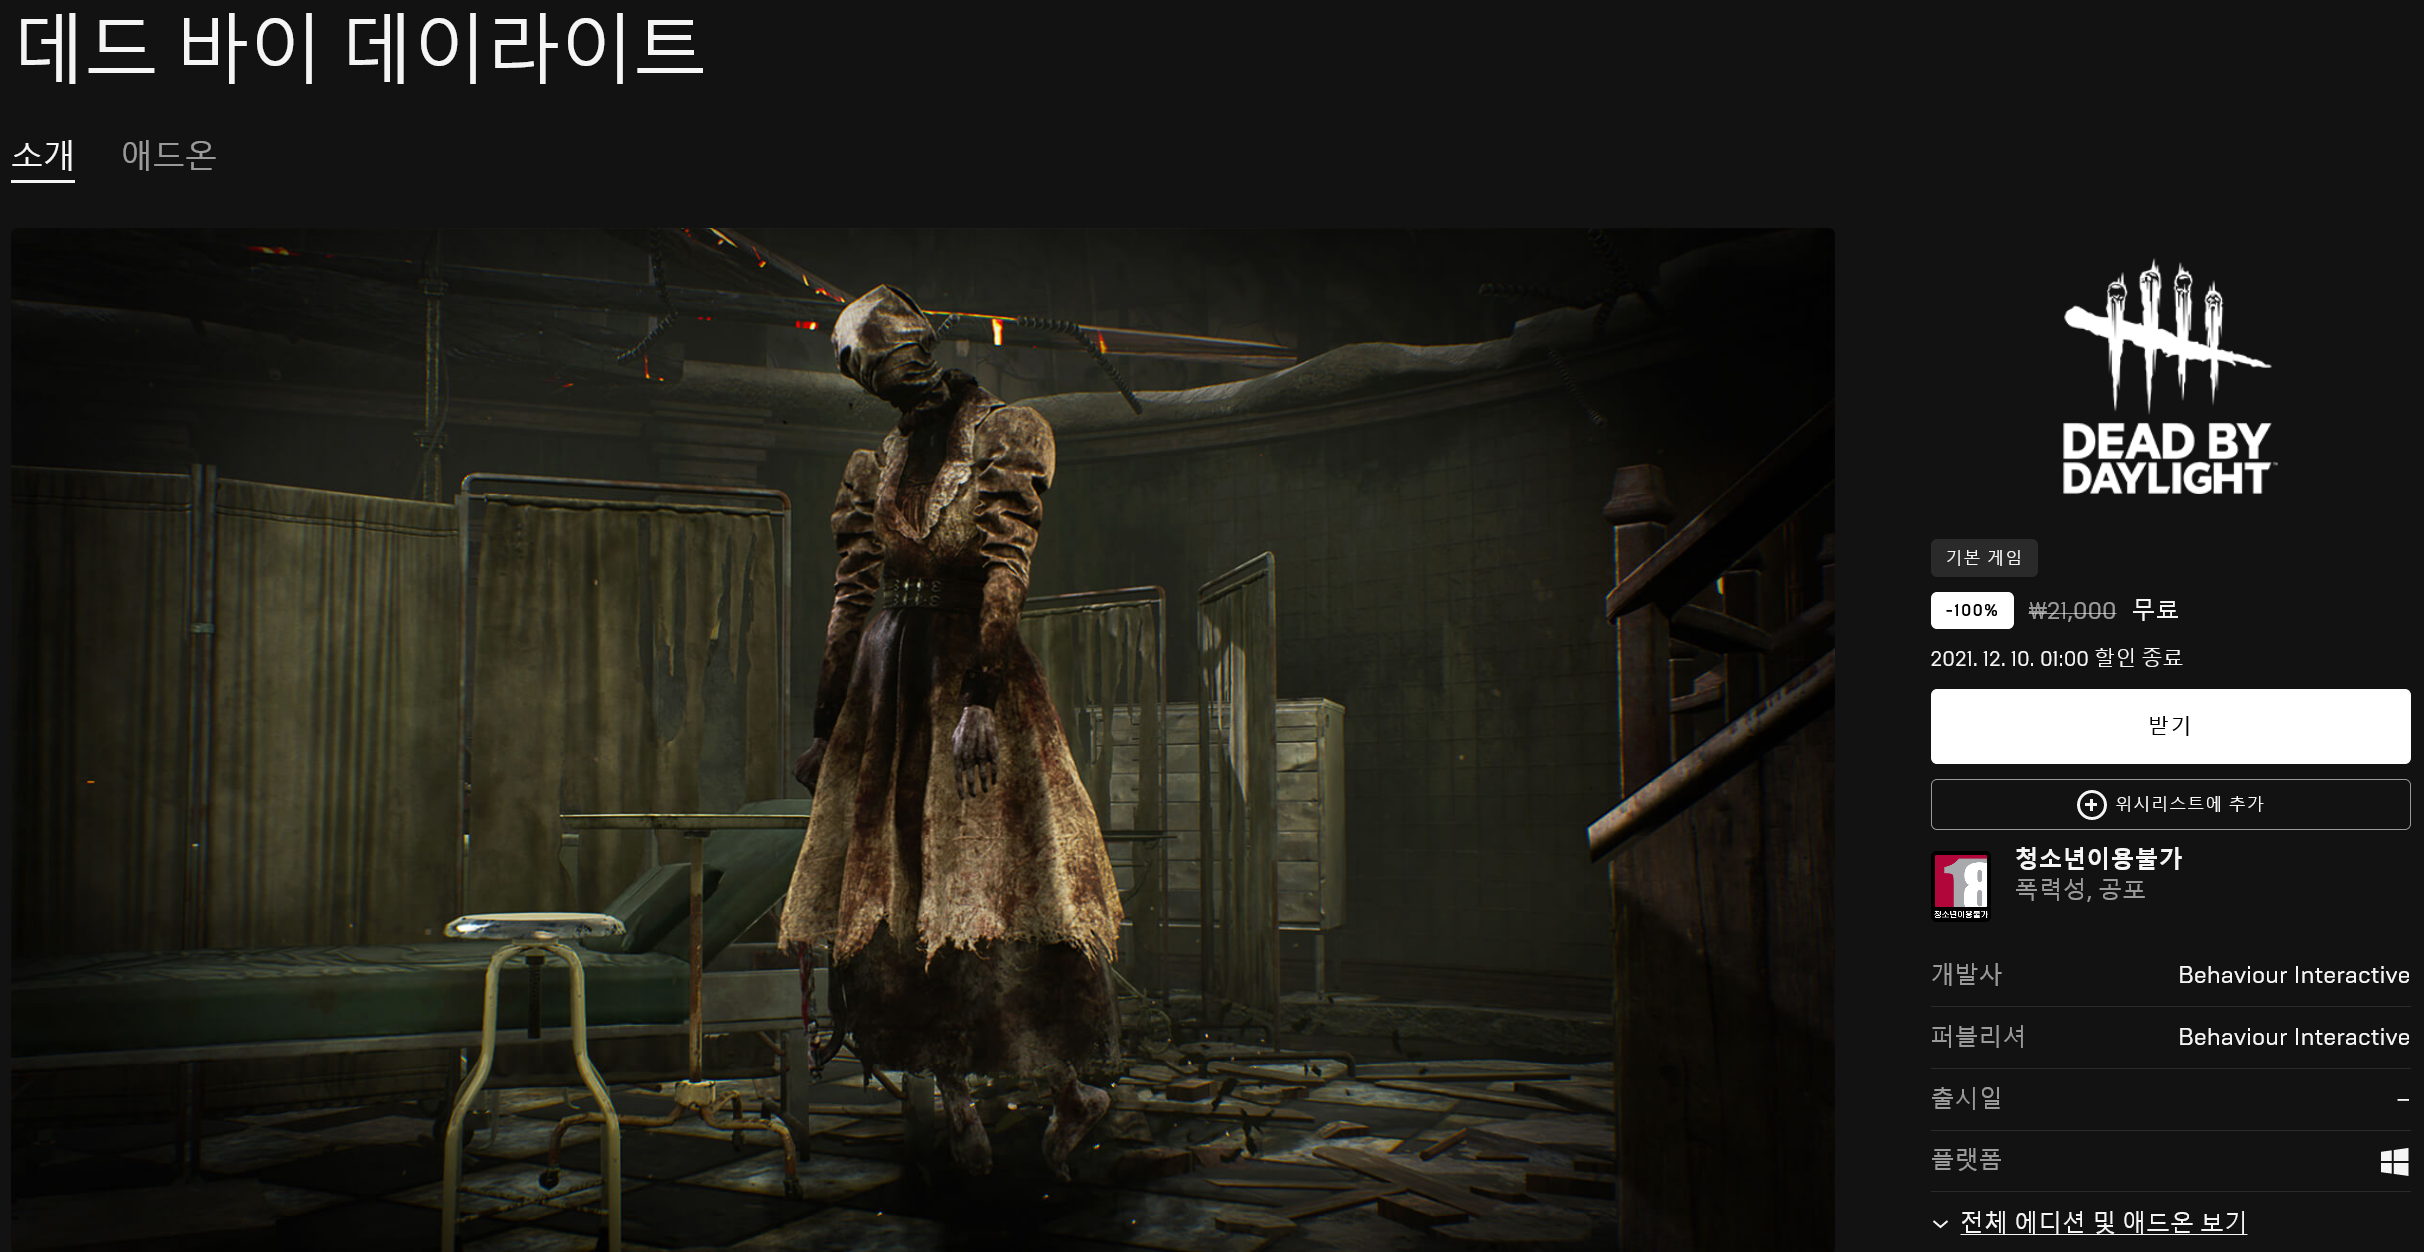 Screenshot 2021-12-03 at 01-05-52 Dead by Daylight 오늘 다운로드 및 구매 - Epic Games Store.png